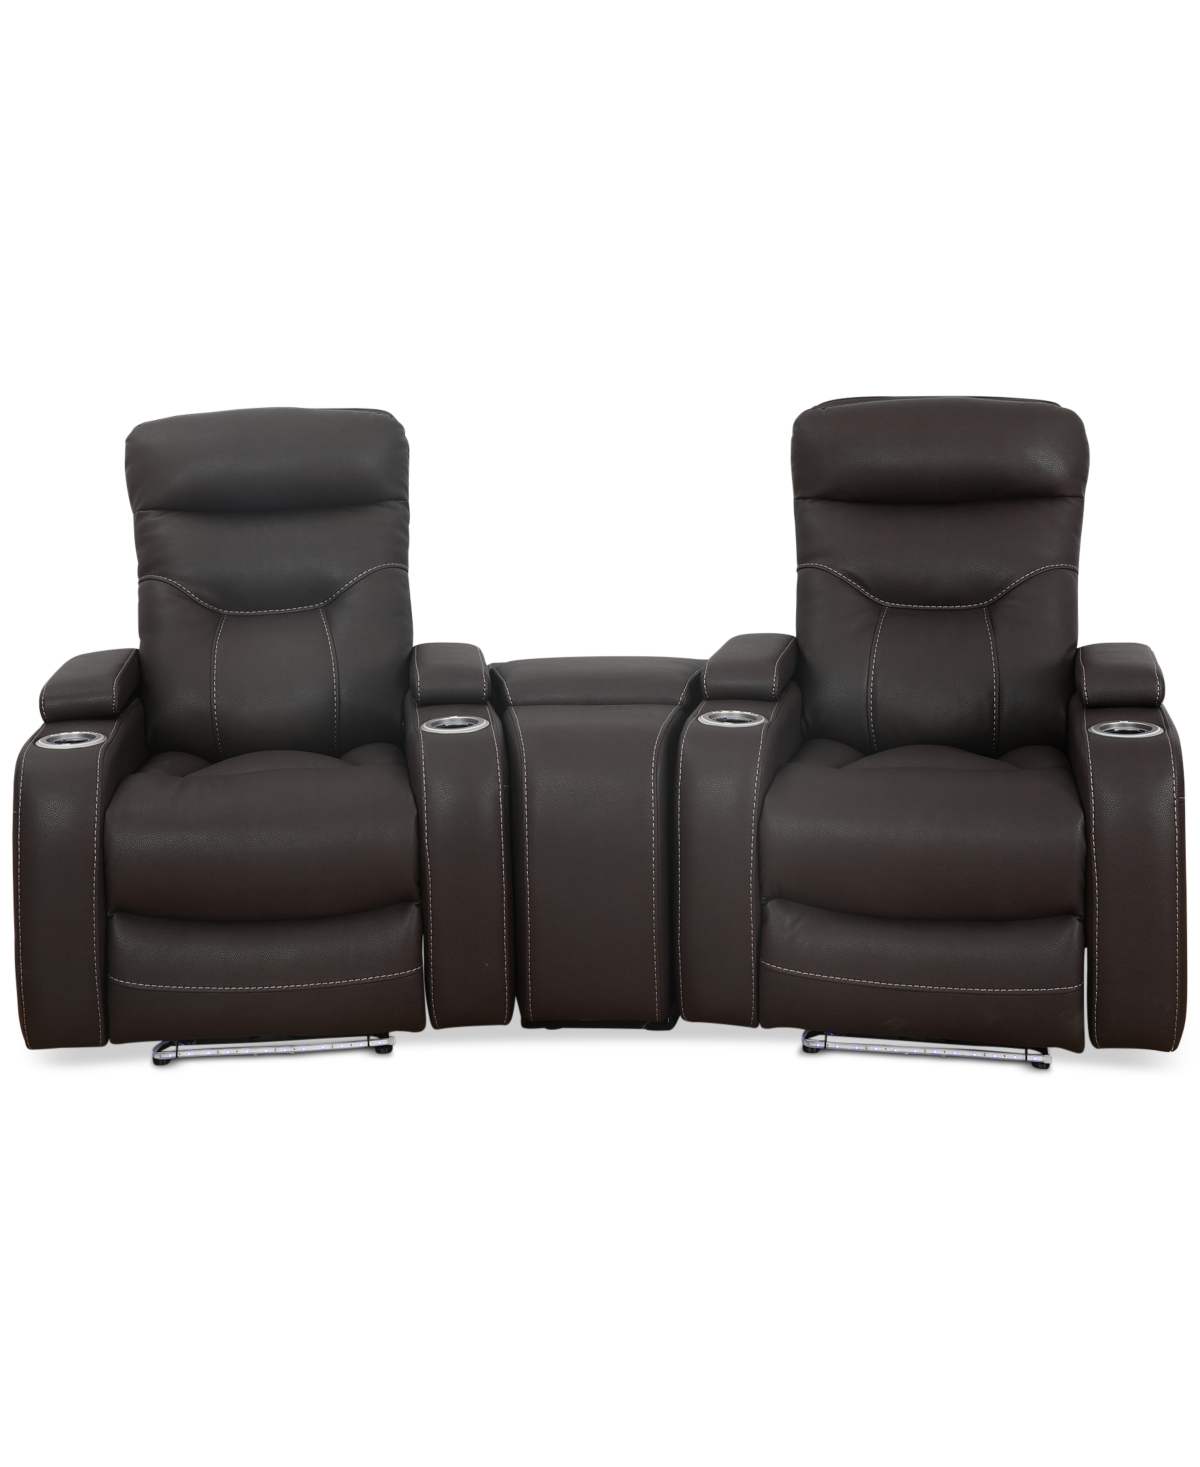 Furniture Jabarr 3-pc. Beyond Leather Theater Seating With 1 Console, Created For Macy's In Dark Brown